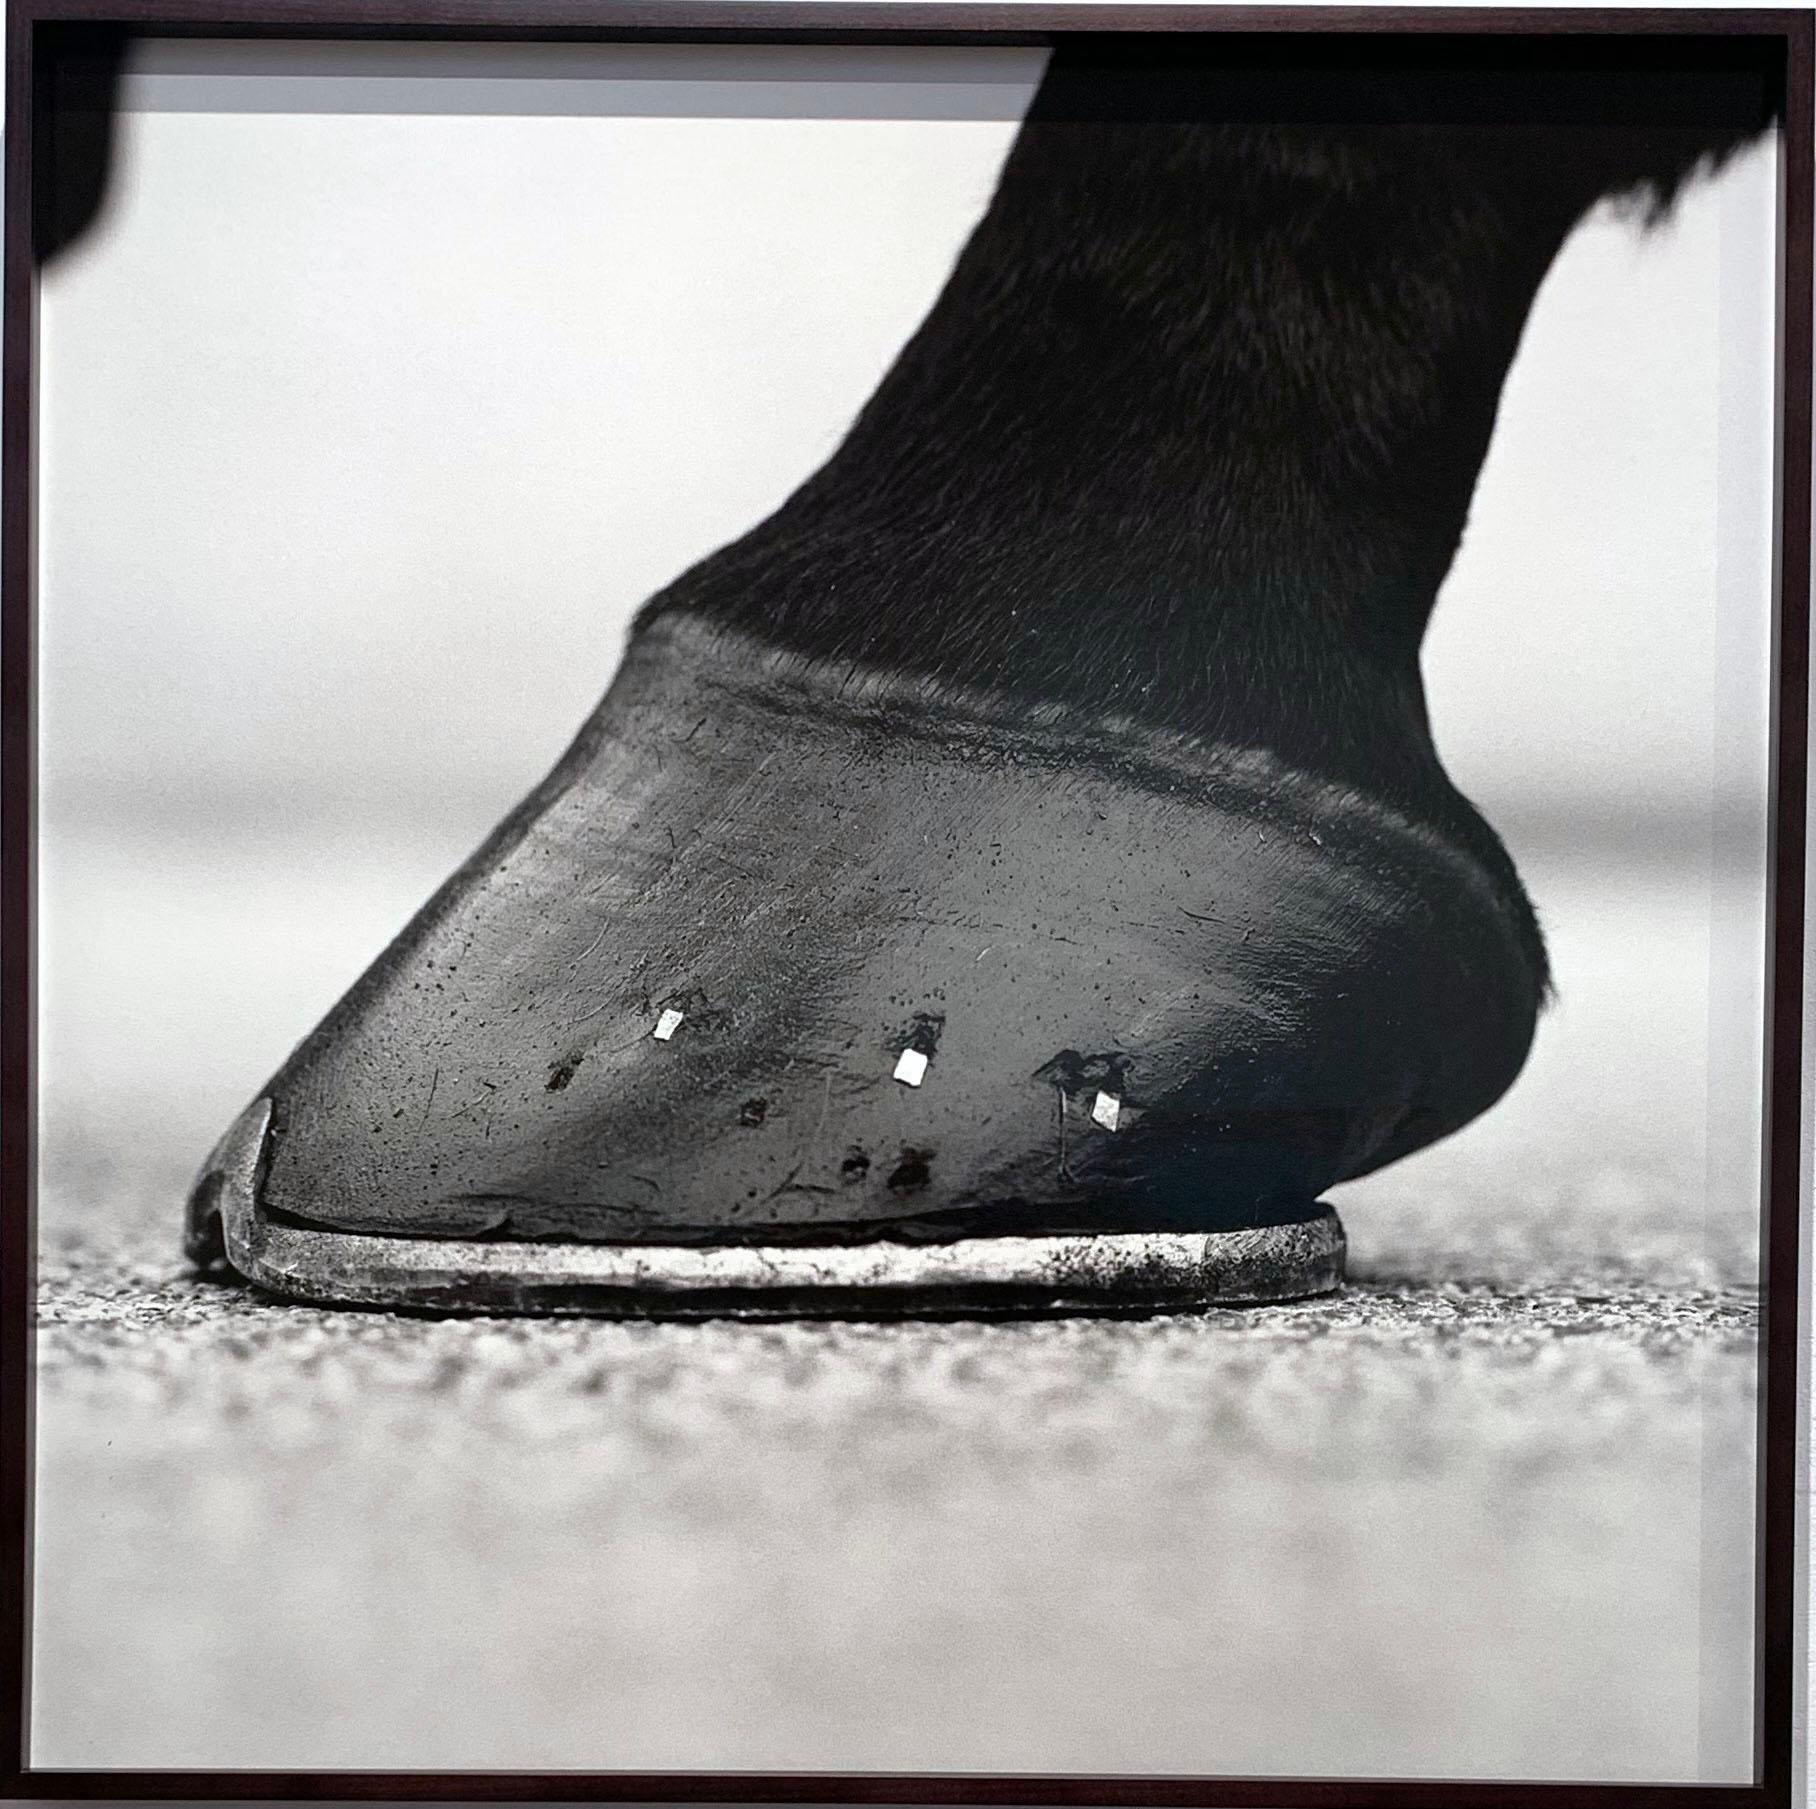 Cape Cross, ‘Hoof’, 2001 by John Reardon
Edition of 2/7
Silver Gelatin Print, Mounted on Aluminium, Custom framed, UV protective Museum AR Glass

This piece is part of (after) Whistlejacket - Contemporary Equine Photographs exhibition at MMX Gallery